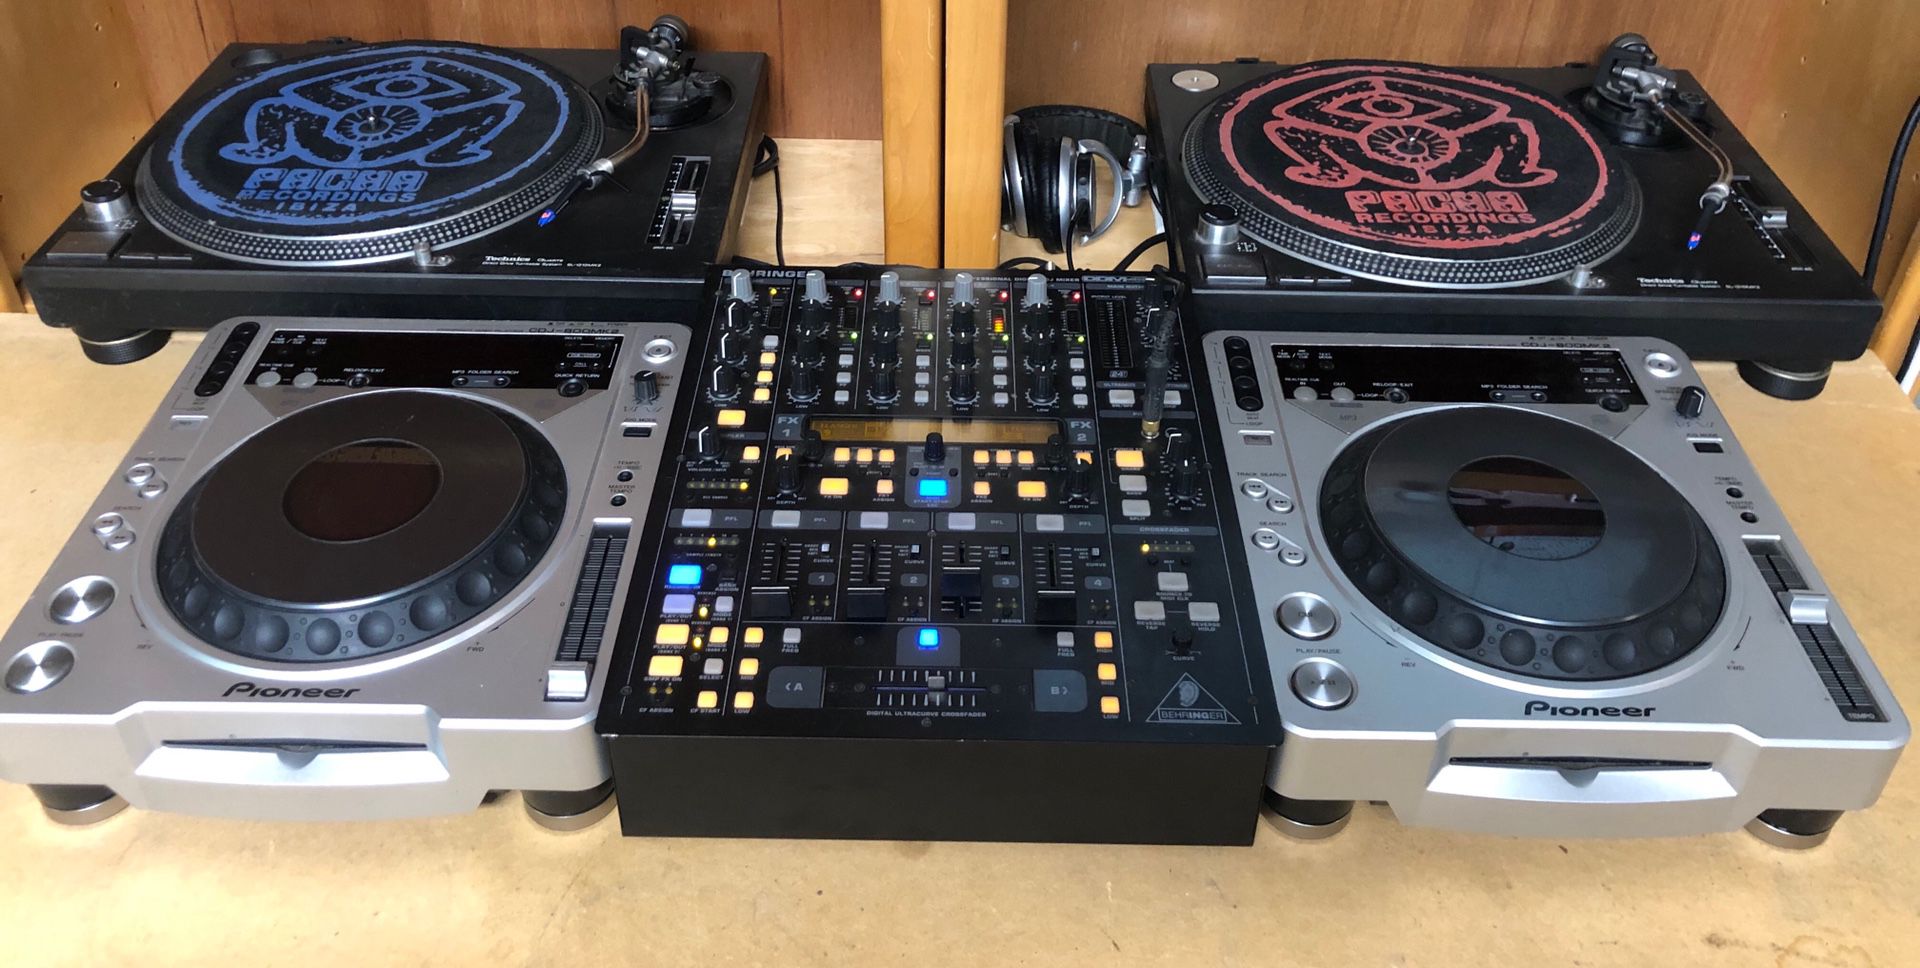 2x Pioneer cdj 800 mk2 220v excellent condition work perfectly. DJ equipment